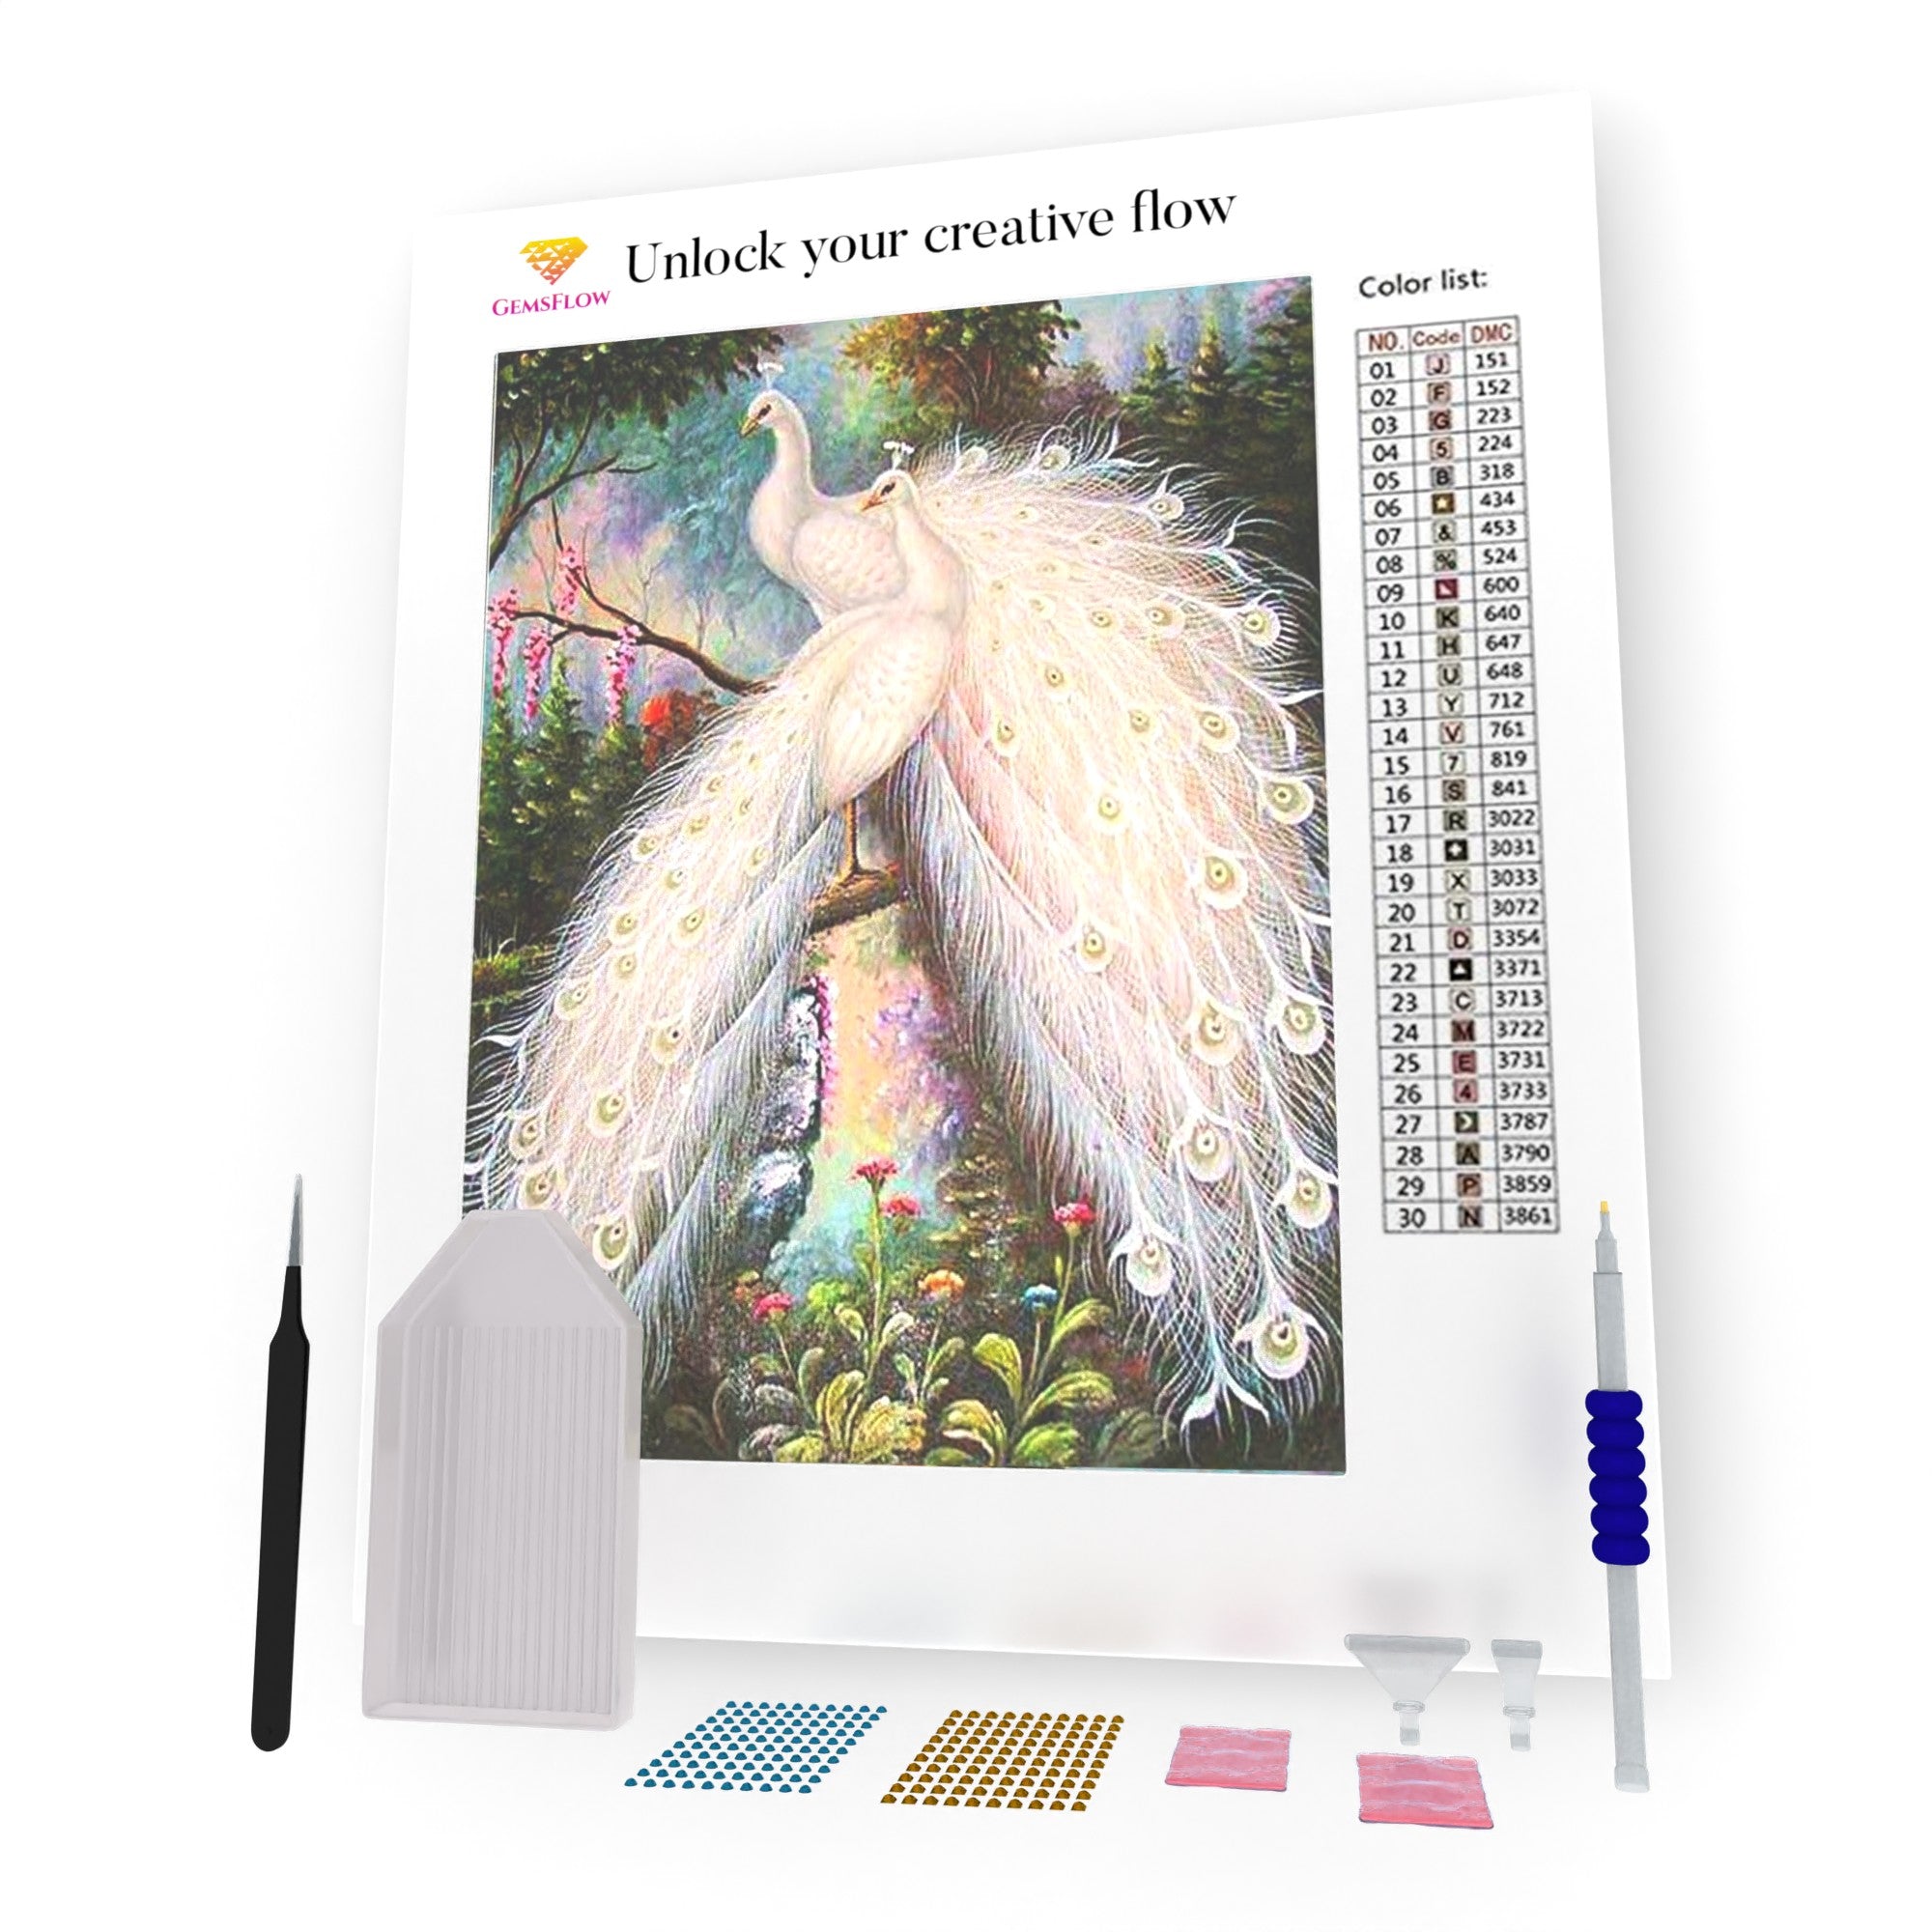 Snuqevc Adult Diamond Painting Kits Beach White Peacock - Full Diamond  Canvas DIY Sparkling Gemstone Art Painting Stress Relief Crafts for Family